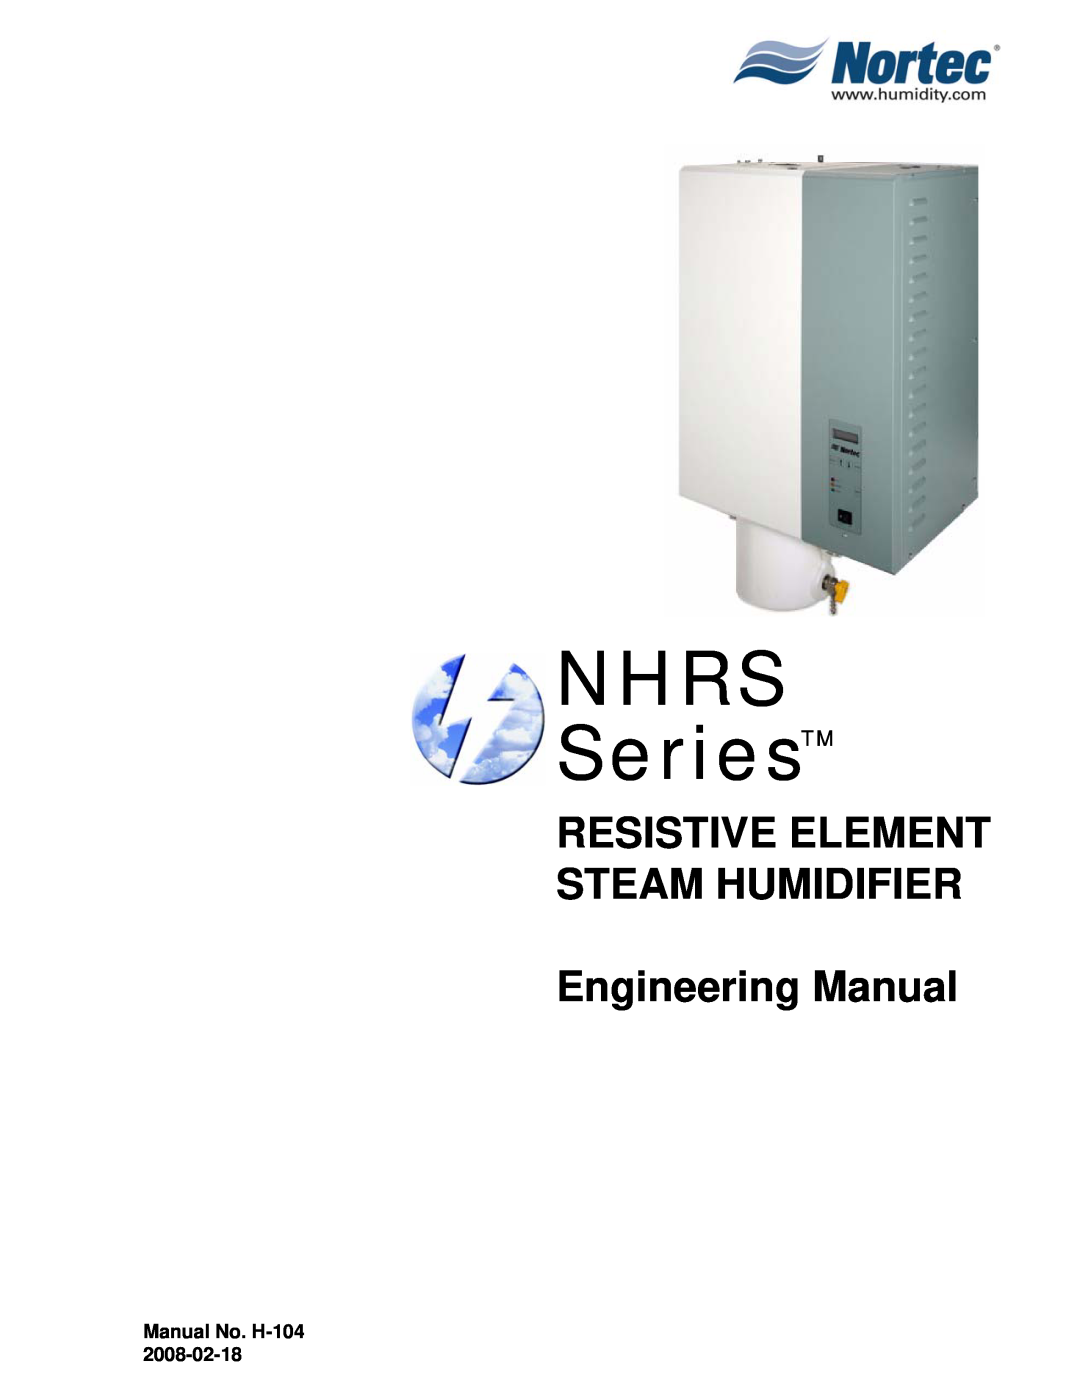 Nortec Industries manual Manual No. H-104, NHRS SeriesTM, Resistive Element Steam Humidifier, Engineering Manual 